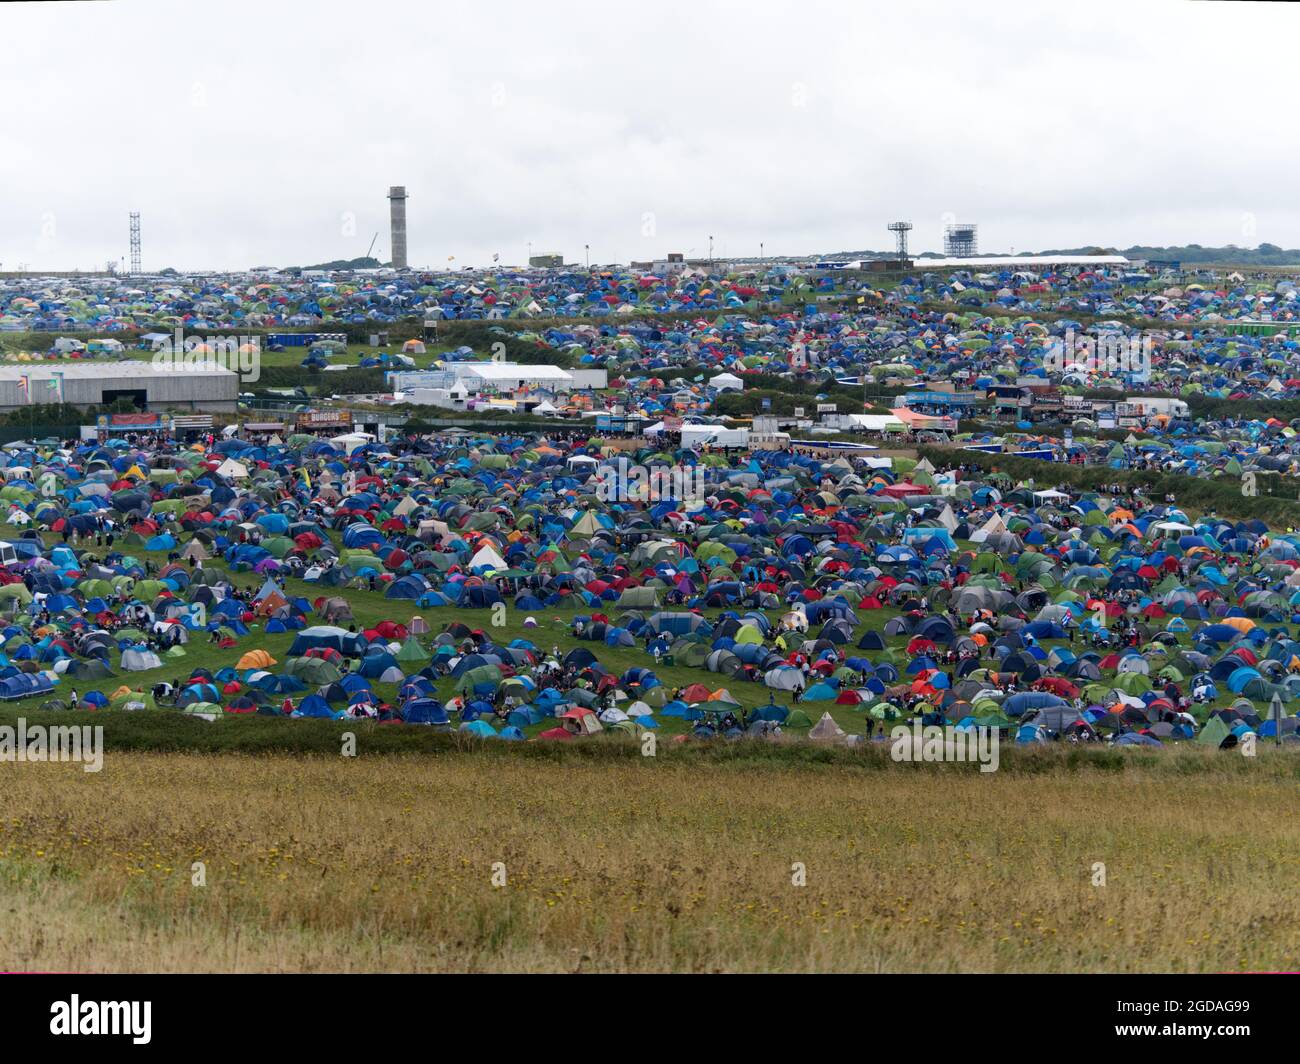 Newquay, Cornwall. 12:00 hours. The Boardmasters 2021 Music and surf festival near Watergate Bay. A Tent and Tipi village created on adjacent farmland to accommadate the tens of thousands expected. Foals Gorillaz and Jorja Smith headline. the Kooks.Also Loyle Carner, Jaie xx, Lianne La Havas an  12th August 2021. Credit: Robert Taylor/Alamy Live News Stock Photo